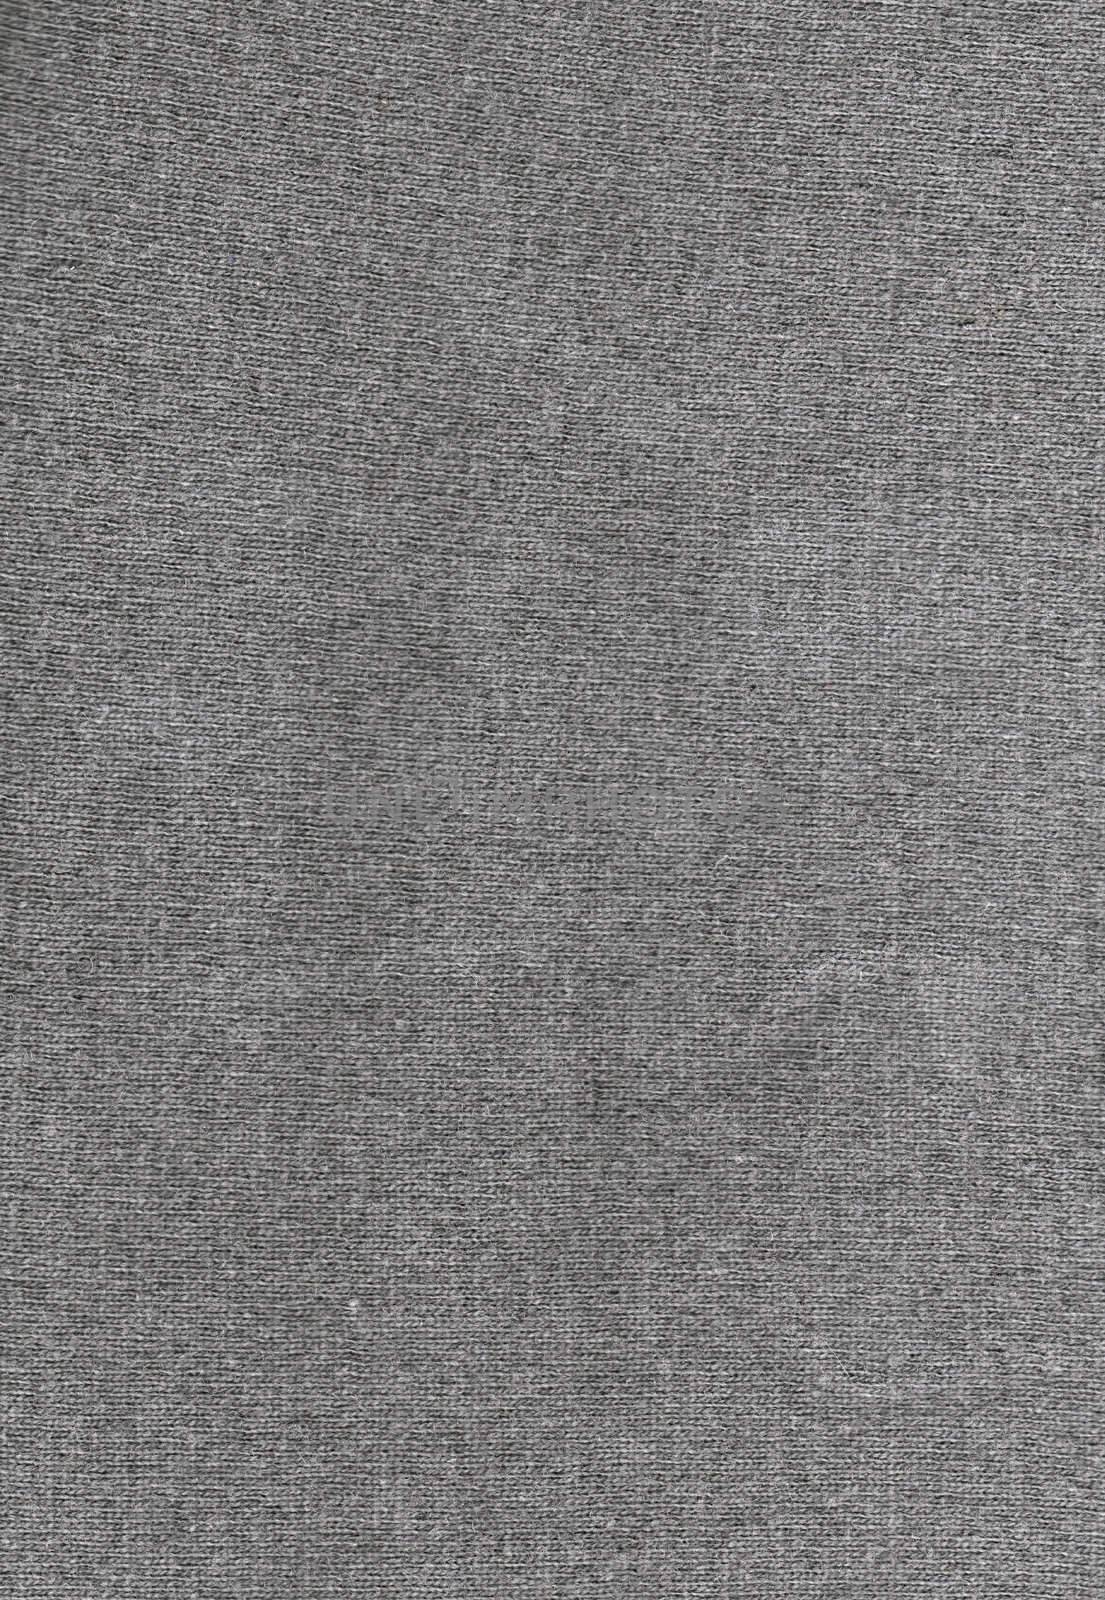 Gray wool background - close-up image